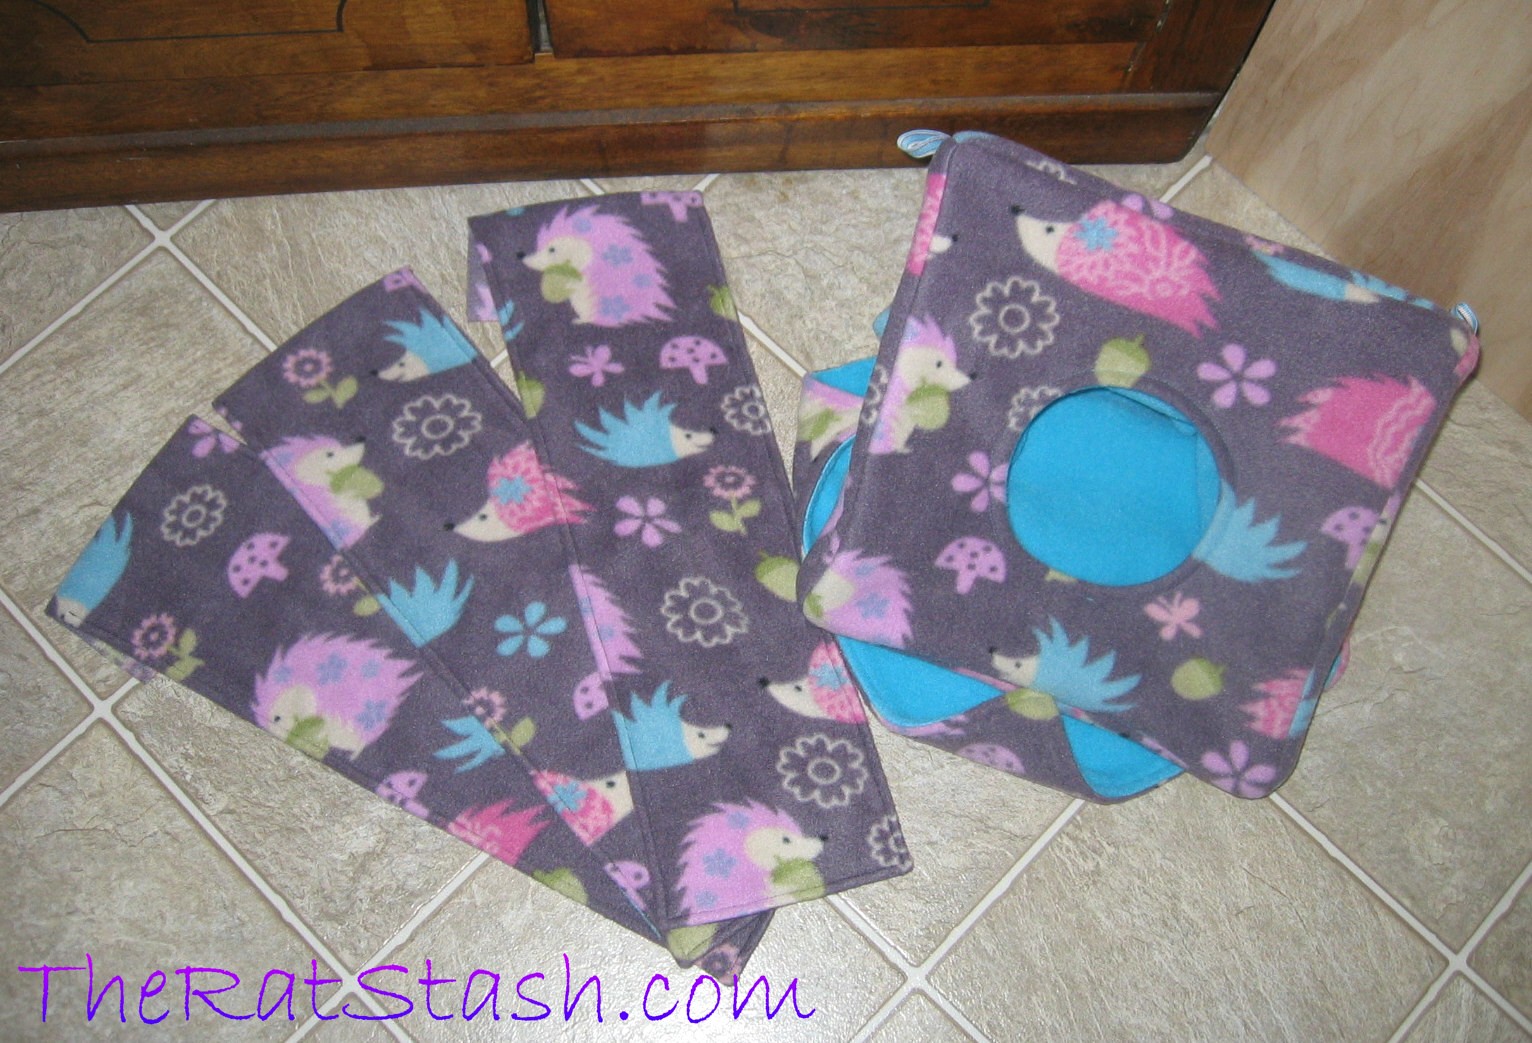 For Allyn: Large "All Fleece" Bungalow & 3 FN/CN Ramp Covers in Hedgehogs